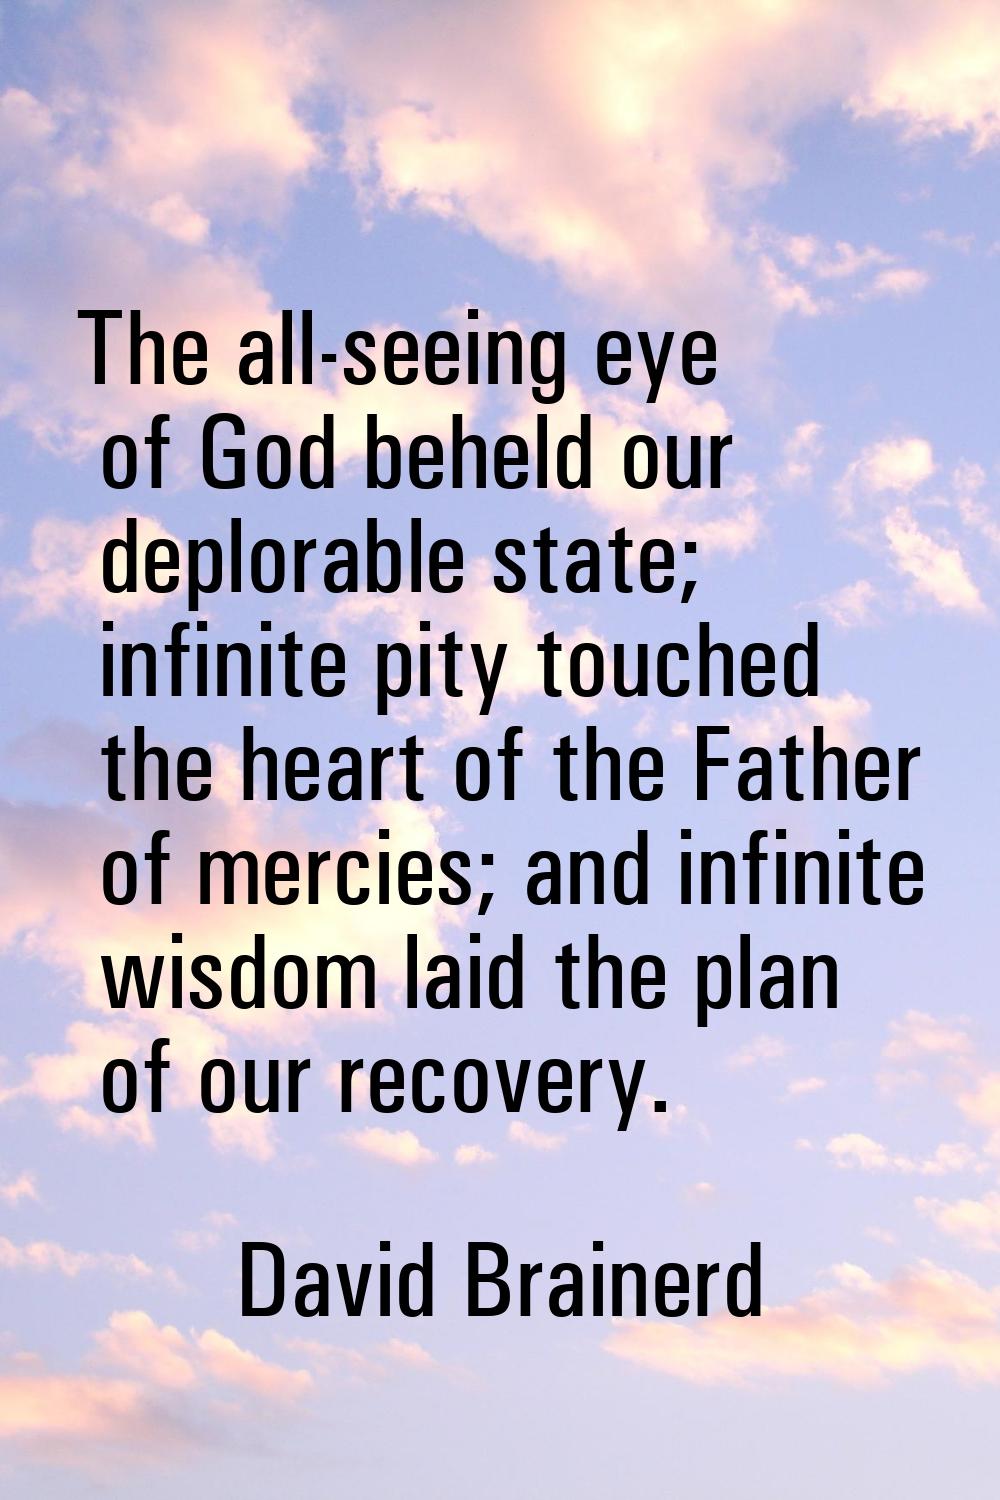 The all-seeing eye of God beheld our deplorable state; infinite pity touched the heart of the Fathe